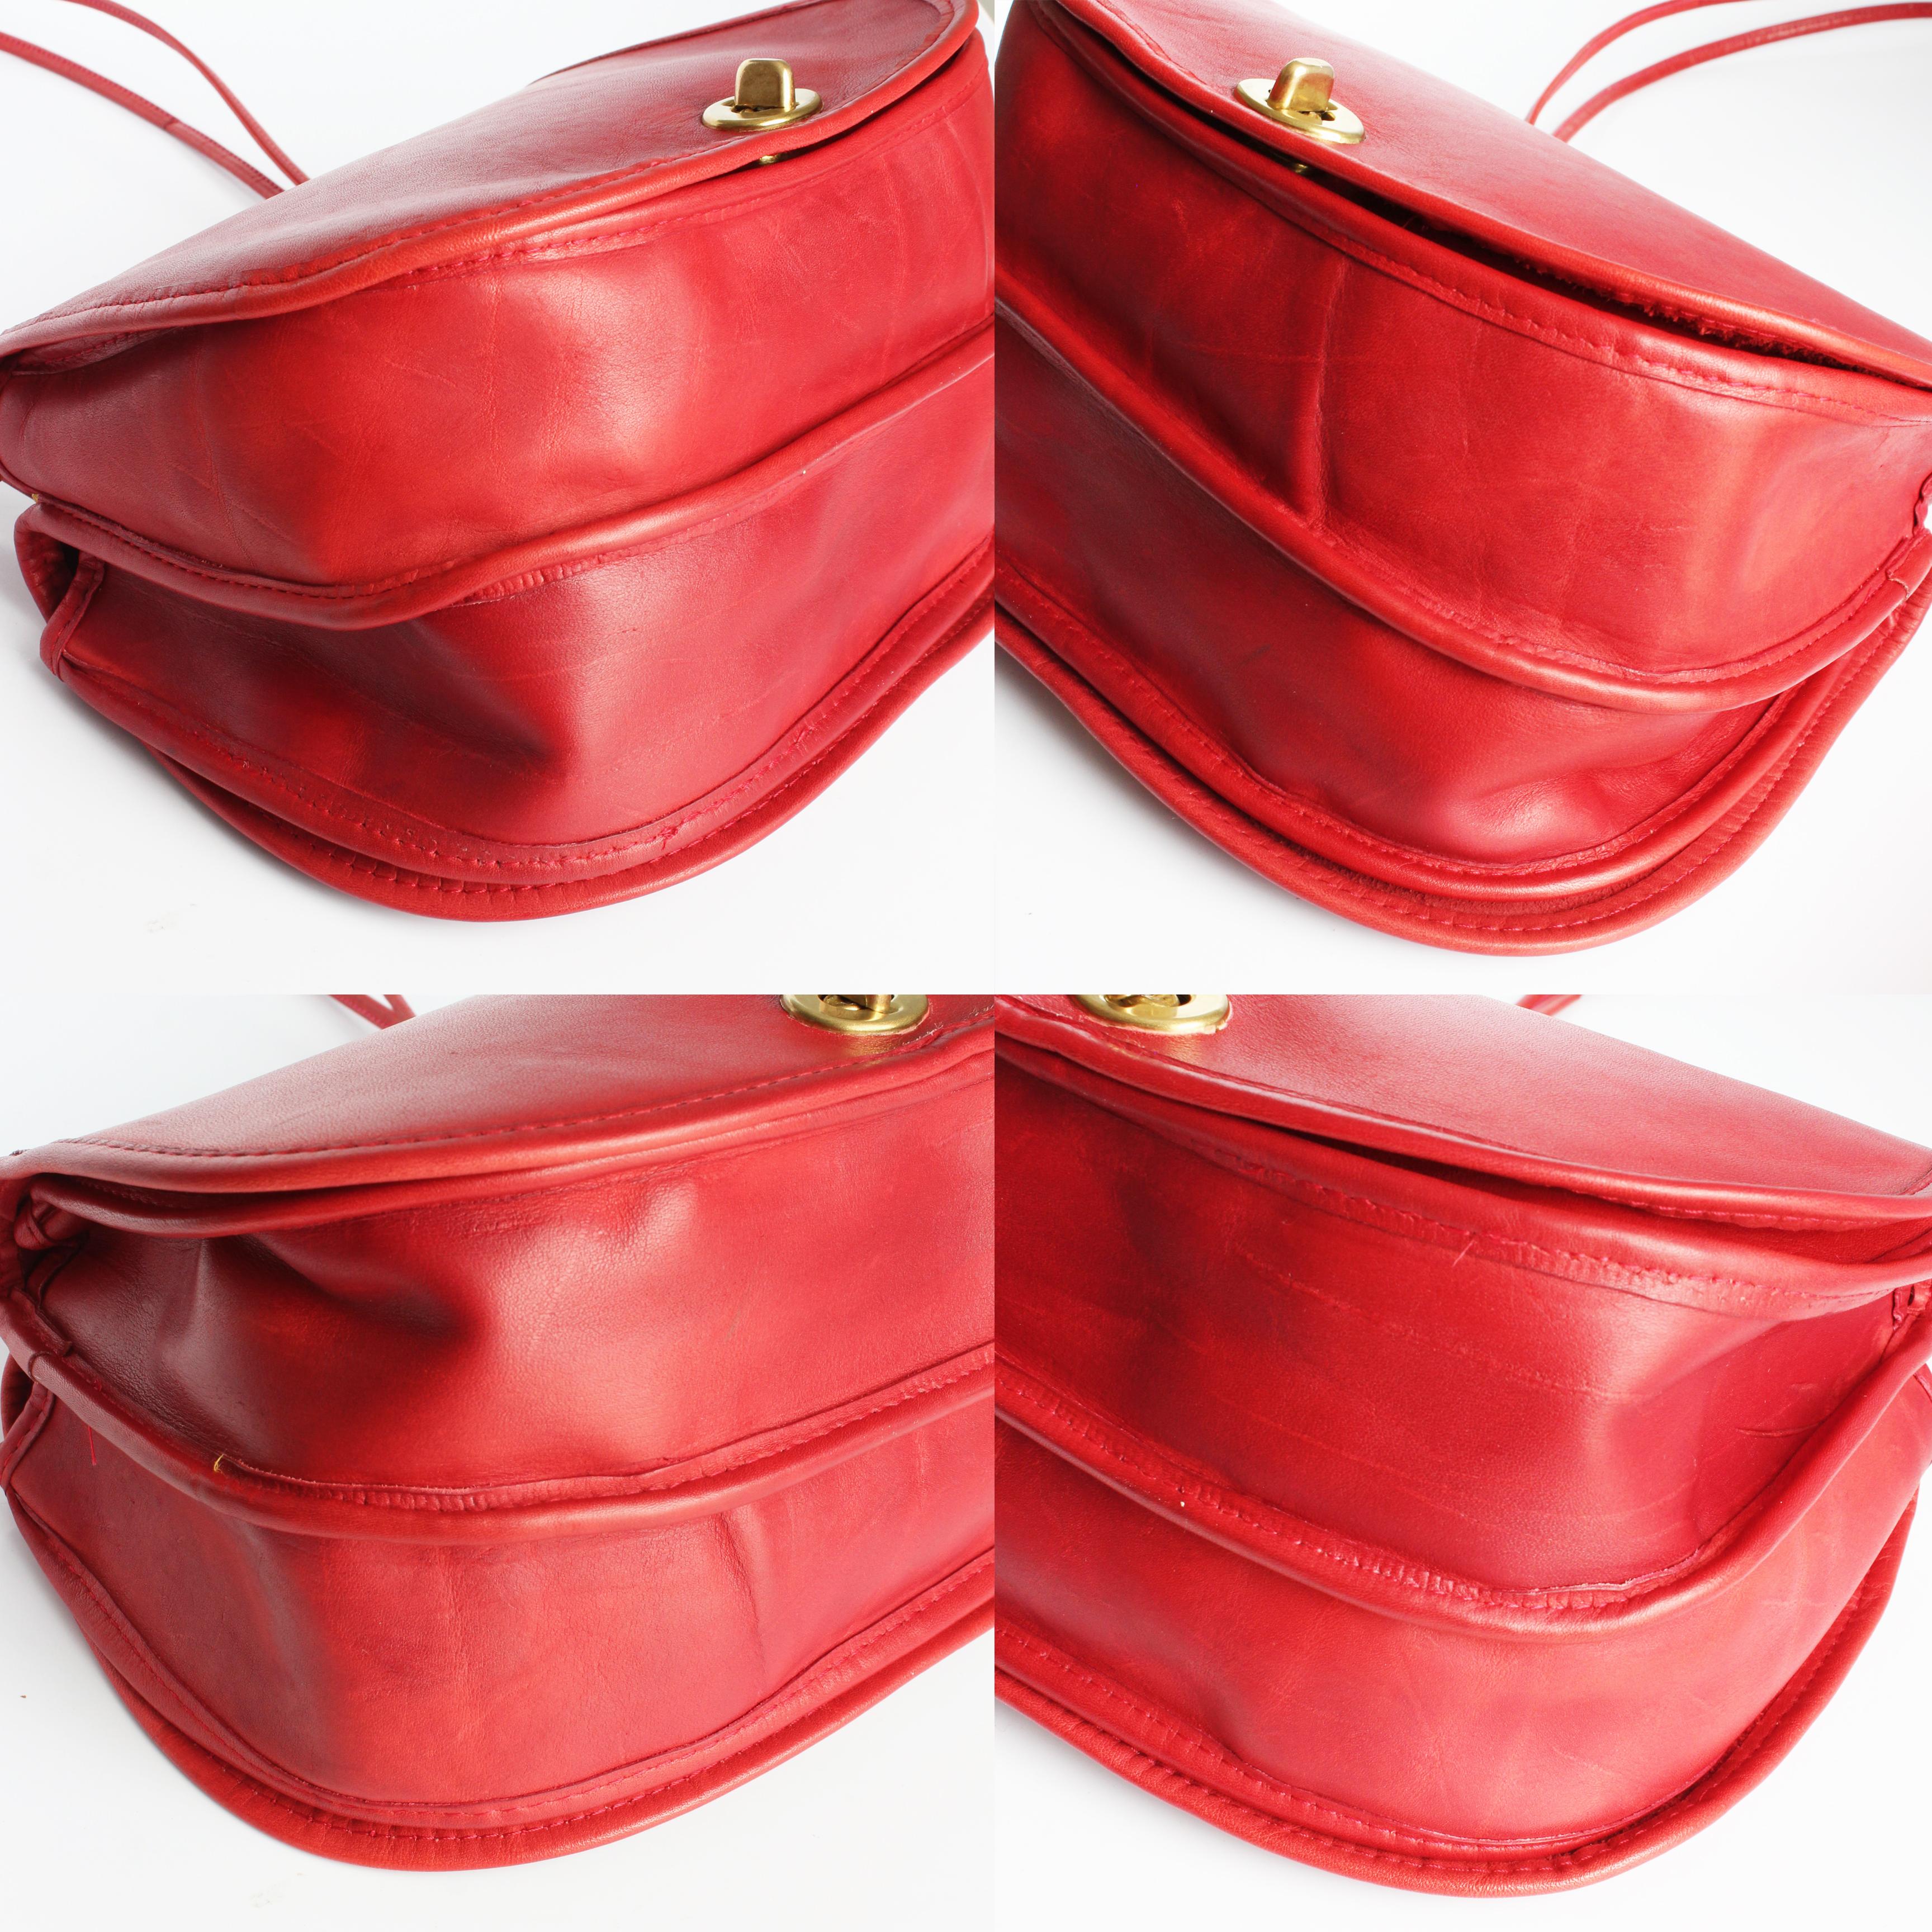 Bonnie Cashin for Coach Bag 2-in-1 Shoulder Pouch Rare Red Leather 1970s HTF For Sale 10